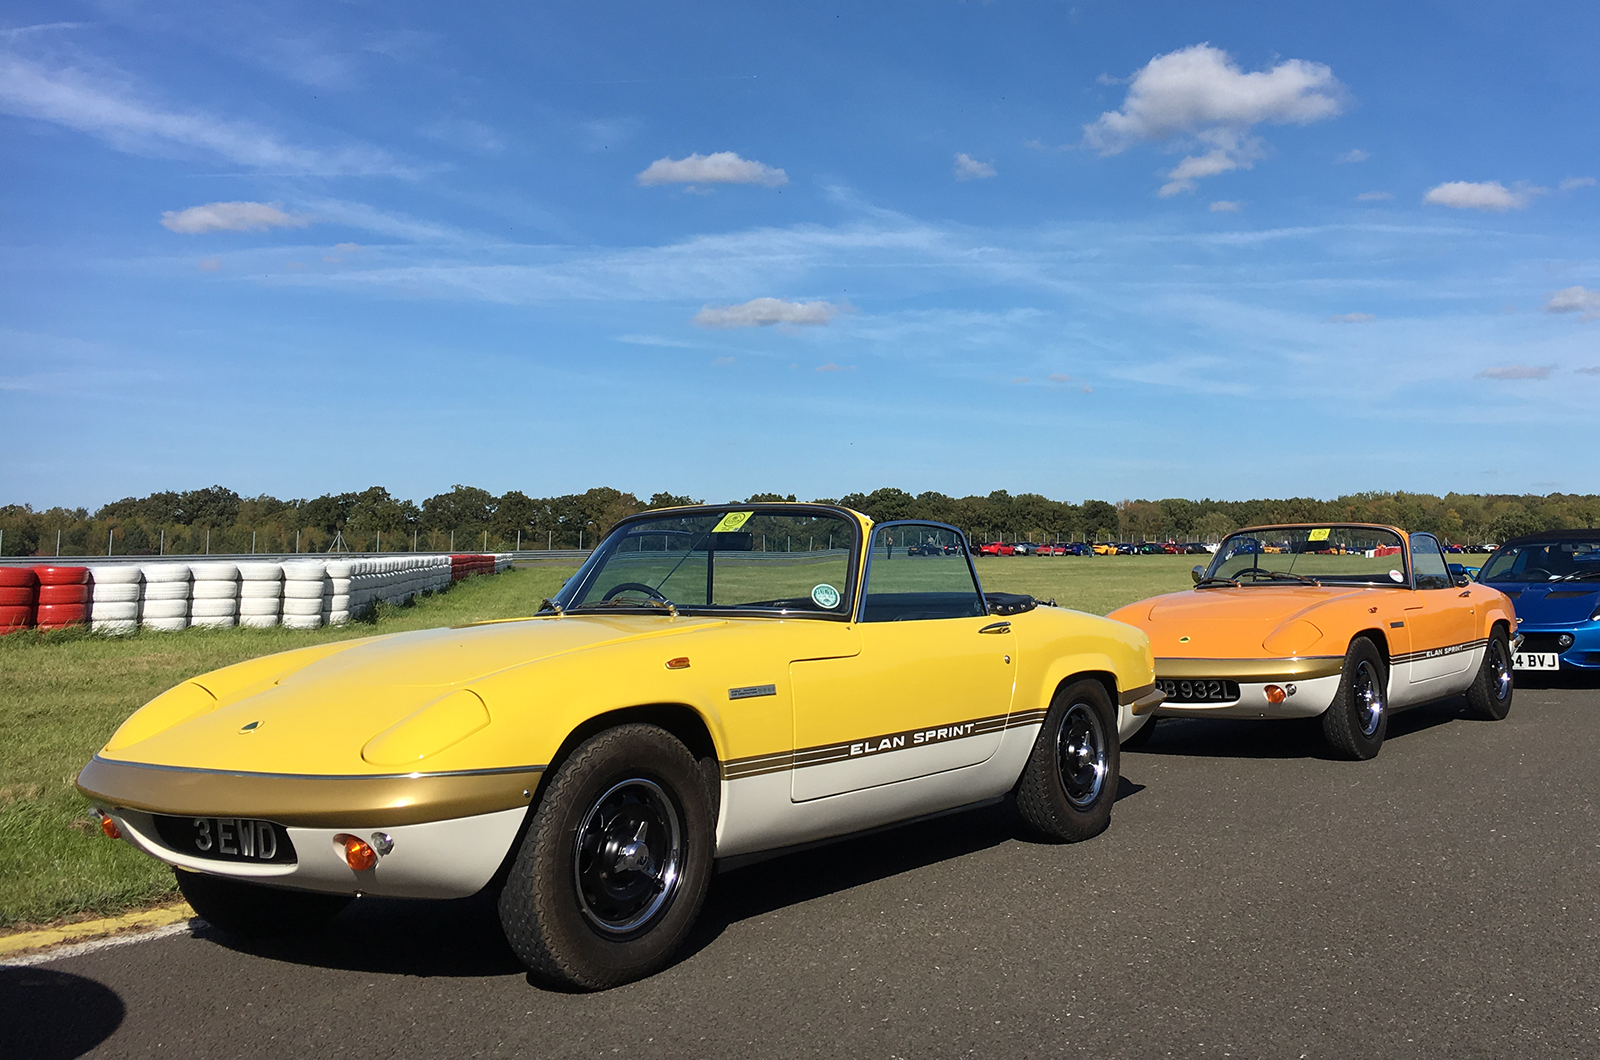 Classic & Sports Car – Lotus celebrates its big day in style with 700-car parade